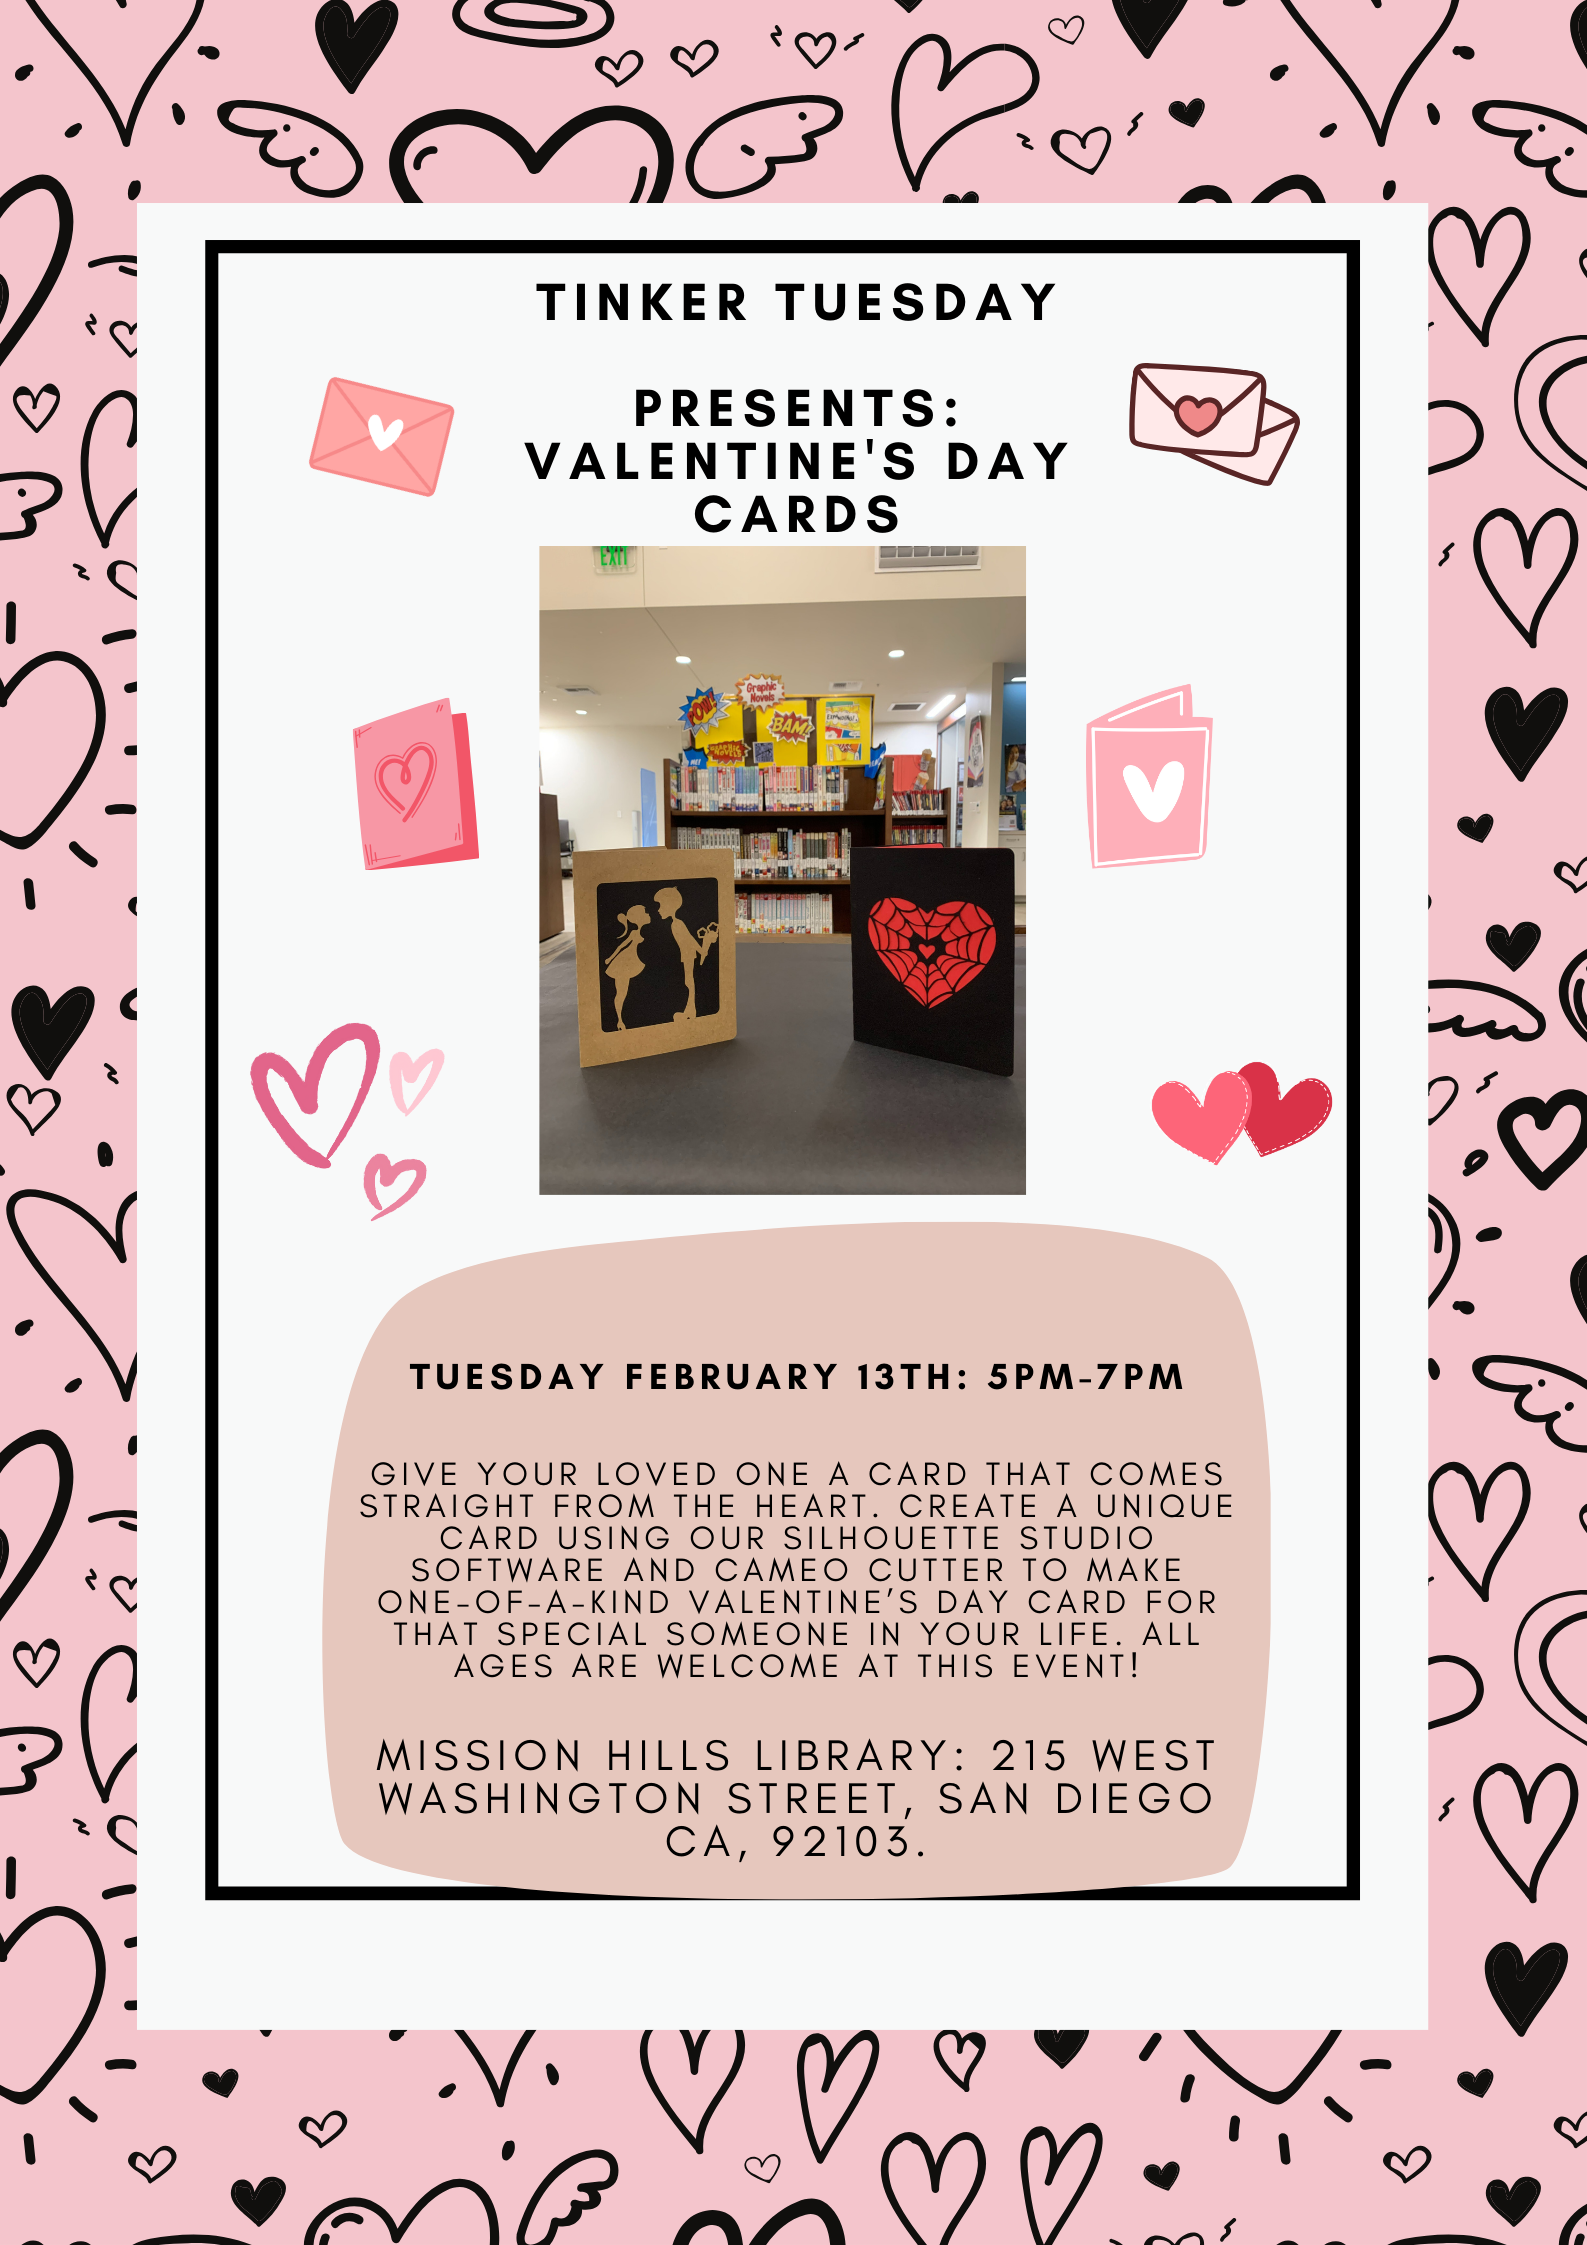 Tinker Tuesday Valentine's Event